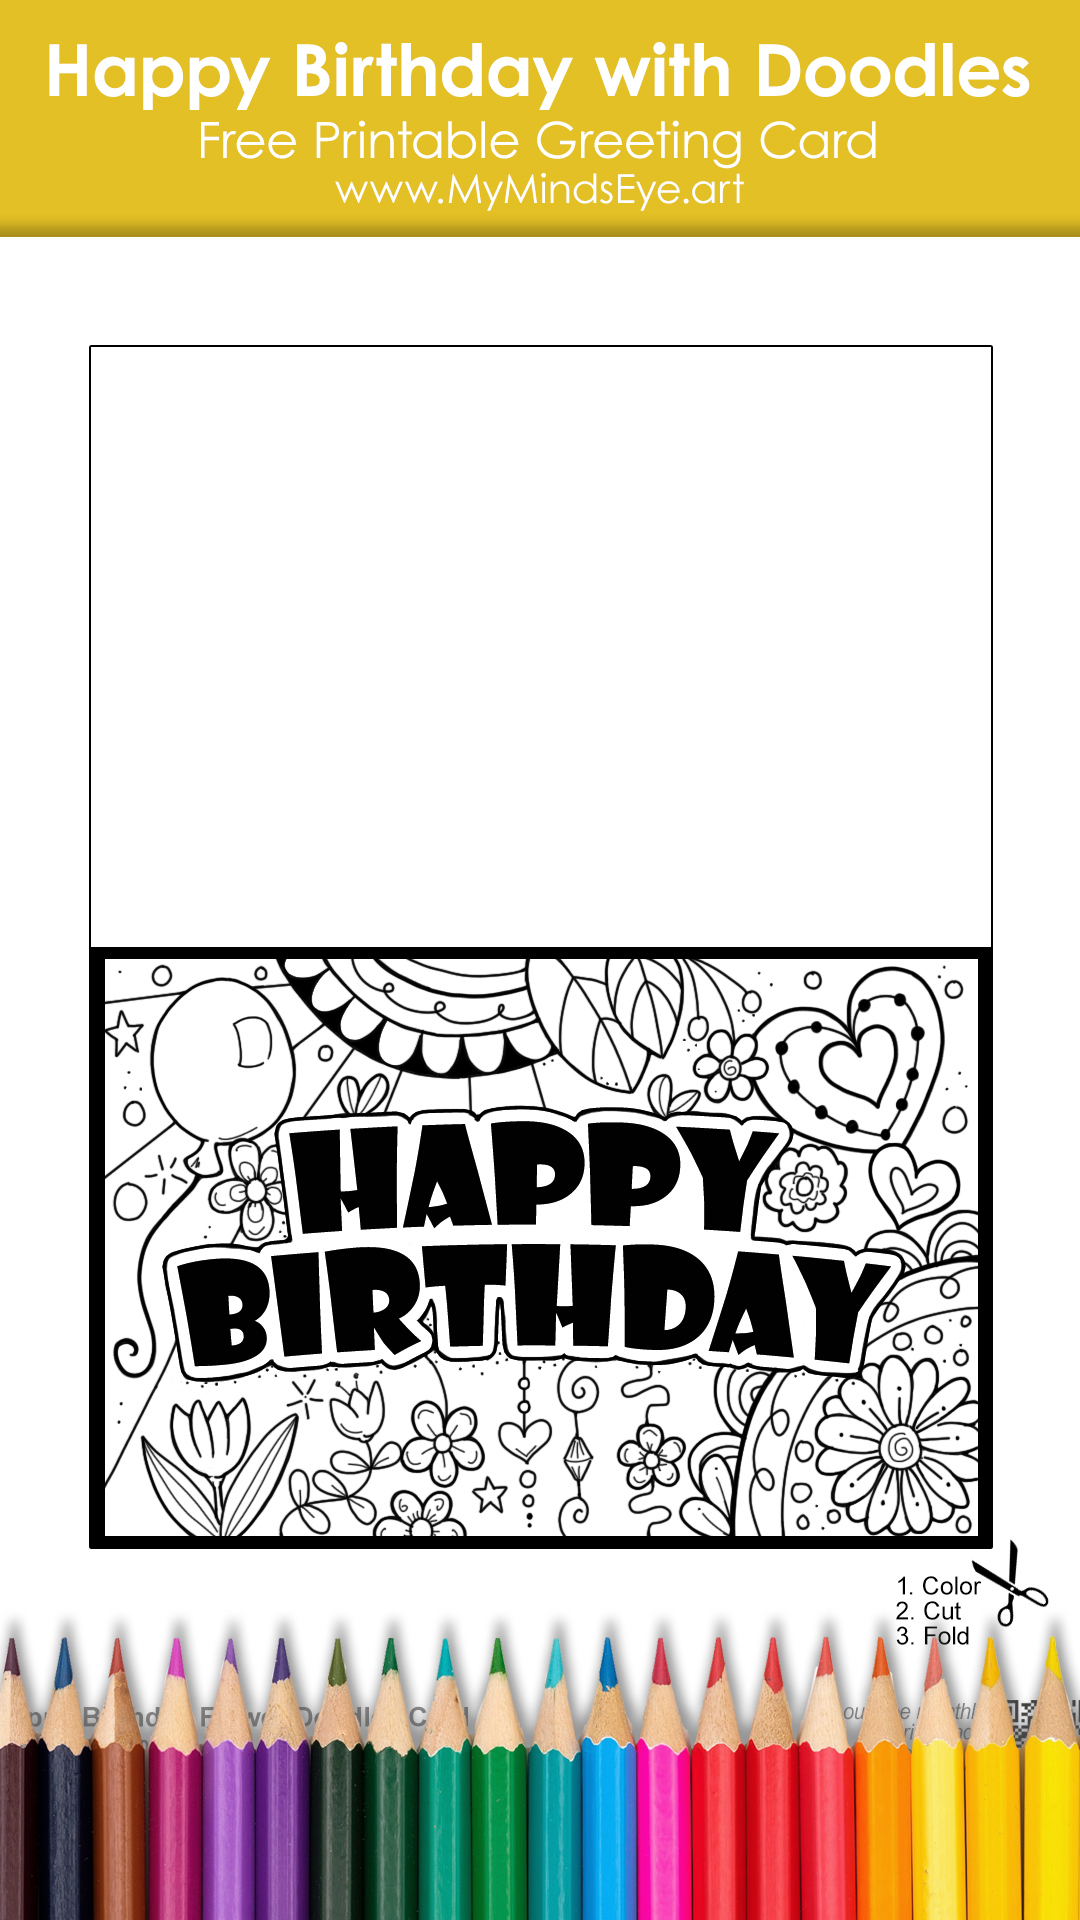 Image of printable Birthday Card to color in.